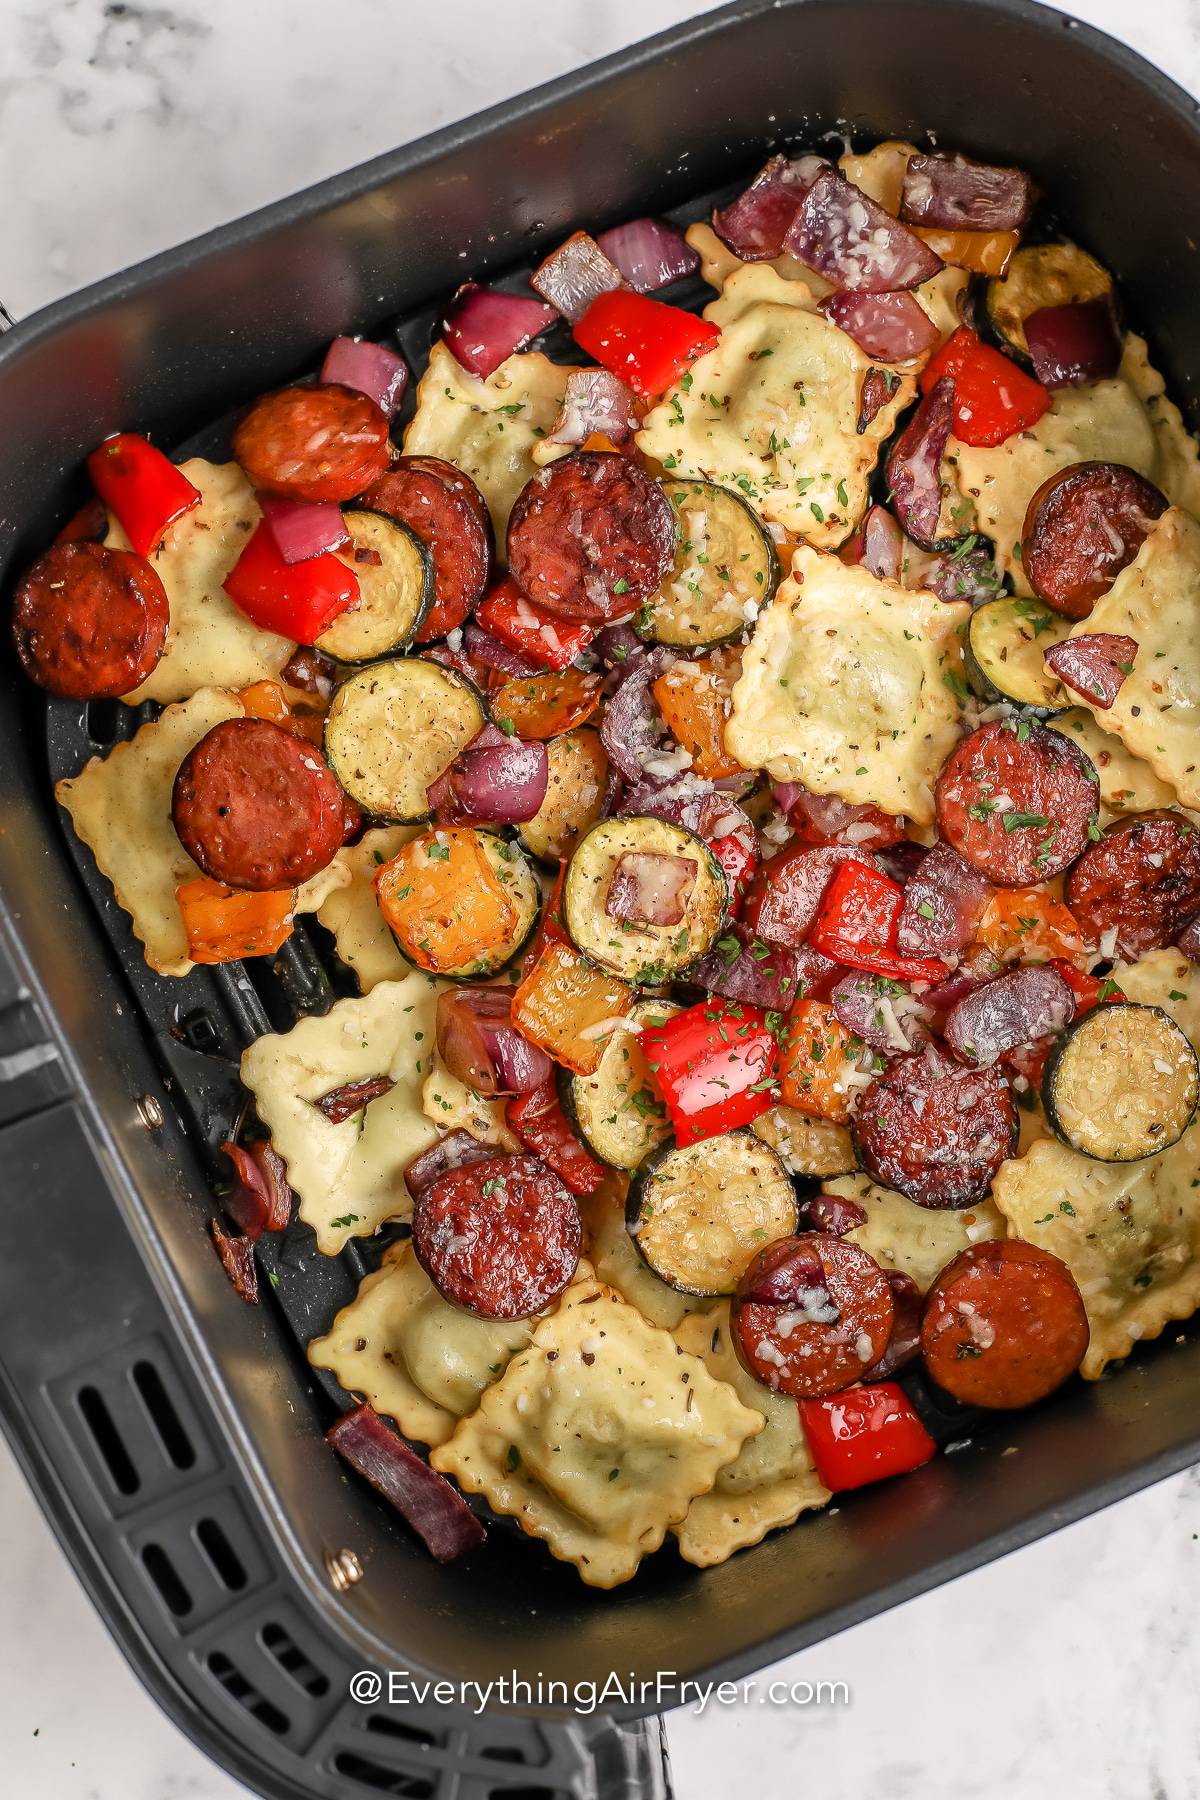 Air Fryer Mixed Vegetables with Ravioli and Sausage cooked in an air fryer basket